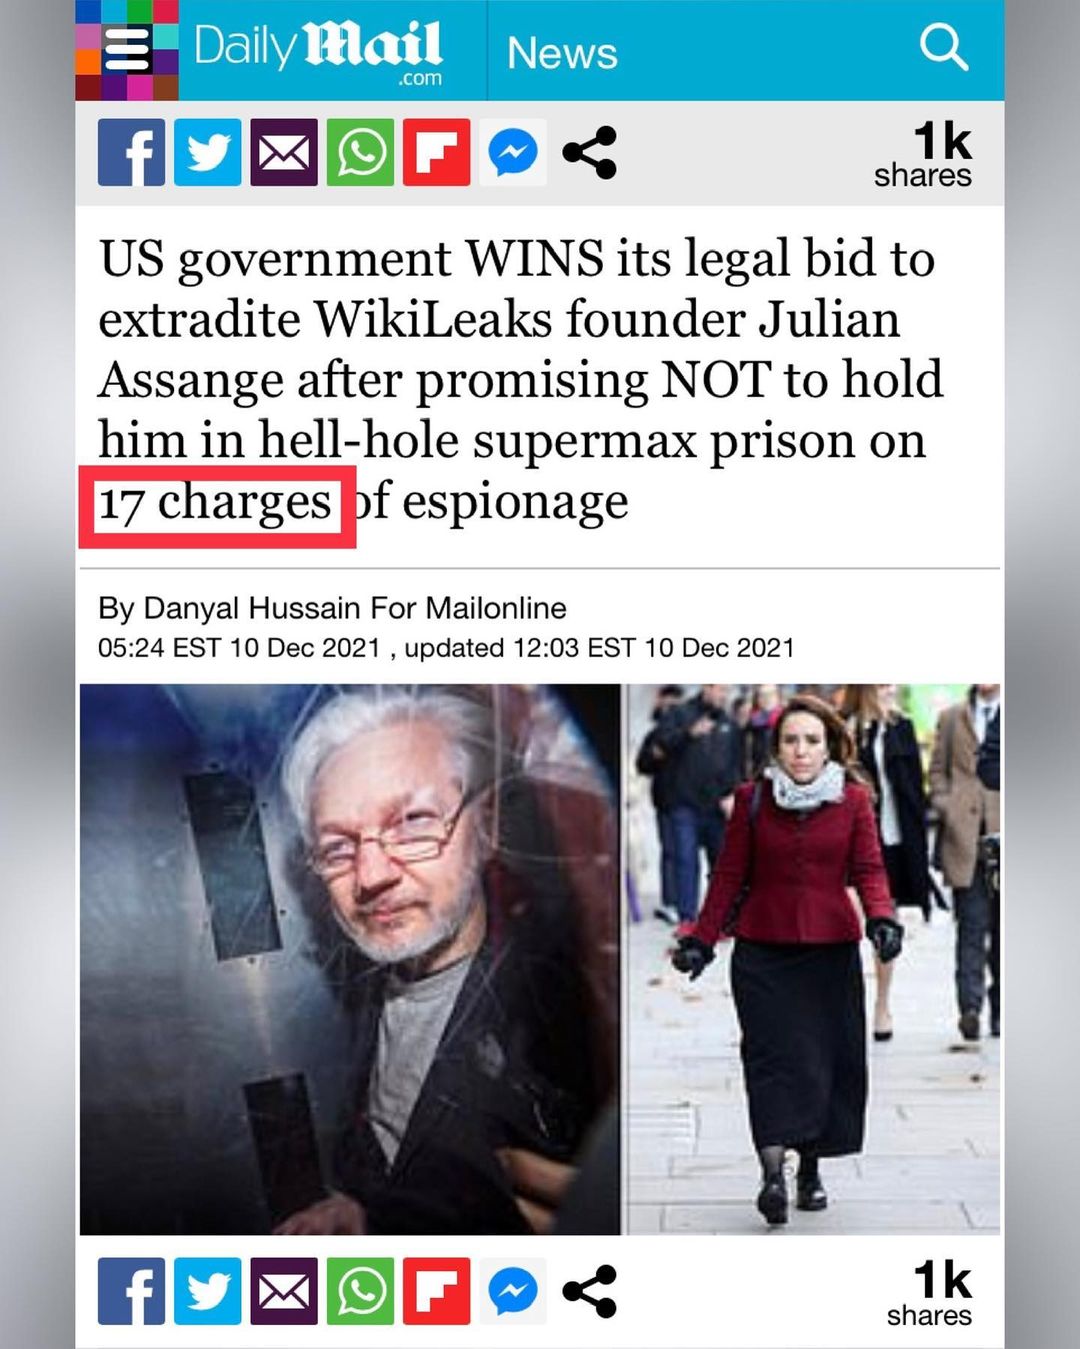 You are currently viewing US government WINS its legal bid to extradite WikiLeaks founder Julian Assange after promising NOT to hold him in hell-hole supermax prison on 17 charges of espionage